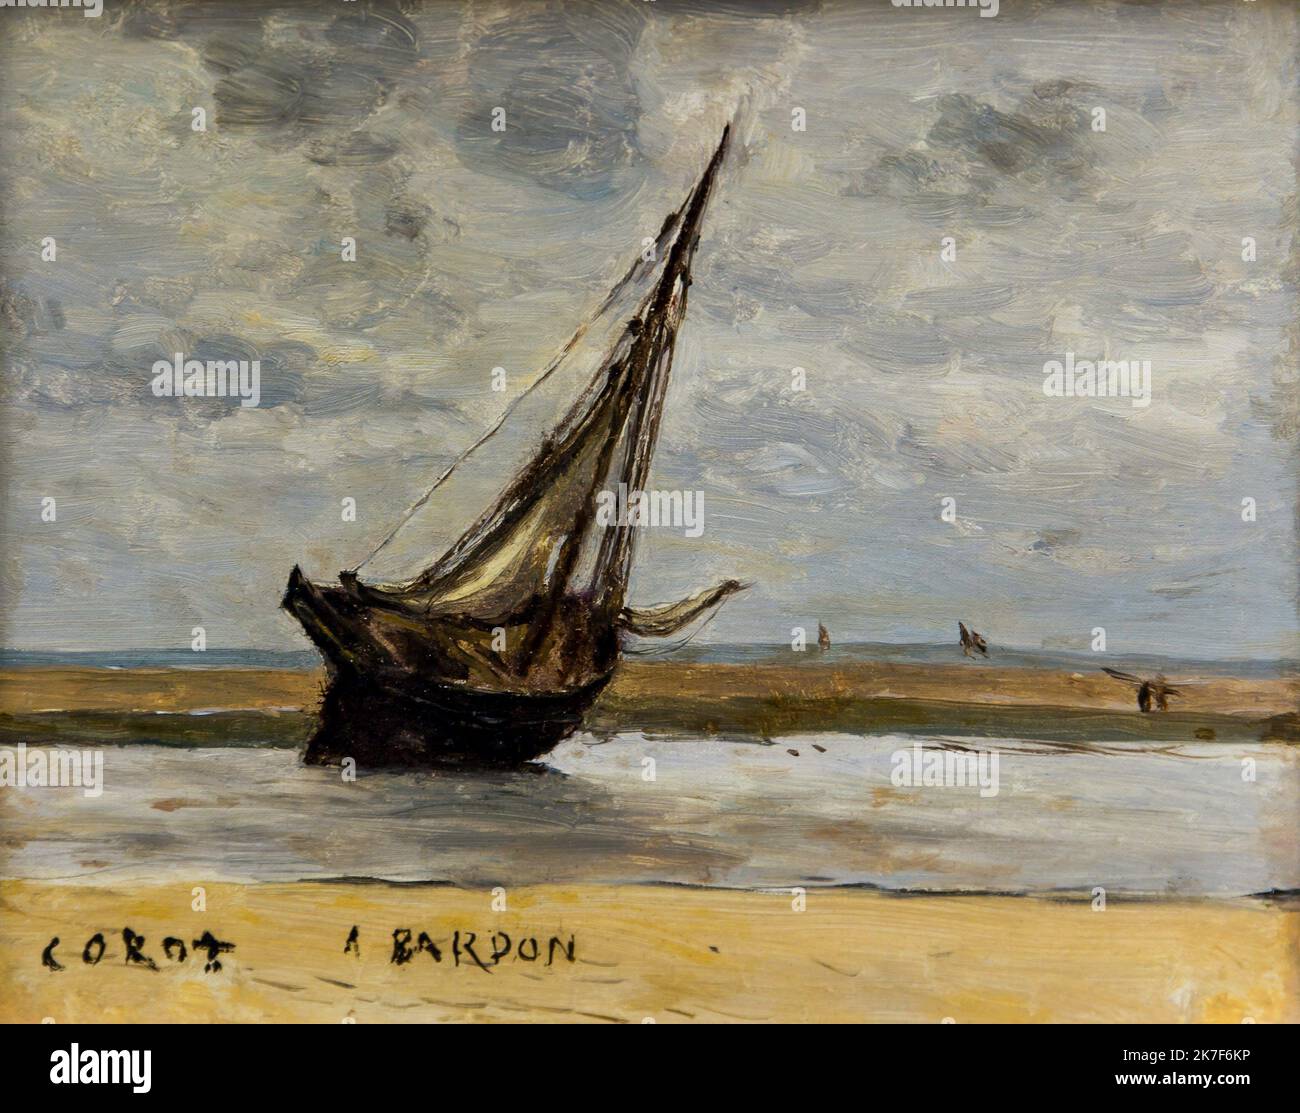 ©Active Museu/MAXPPP - ActiveMuseum 0001646.jpg / Trouville. Bateau echoue, dit Bateau de peche a maree basse, vers 1840 - Camille Corot Peinture a l'huile sur toile 1840 - / Camille Corot / Peinture Active Museum / Le Pictorium Bird ,Cloudy skies ,Fishing boat ,Horizontal ,Low tide ,Wrecked ship ,Calvados (french department) ,Europe ,France ,Lower Normandy ,Normandy ,Trouville ,Western Europe ,19th century ,Camille Corot ,Painting ,  Stock Photo